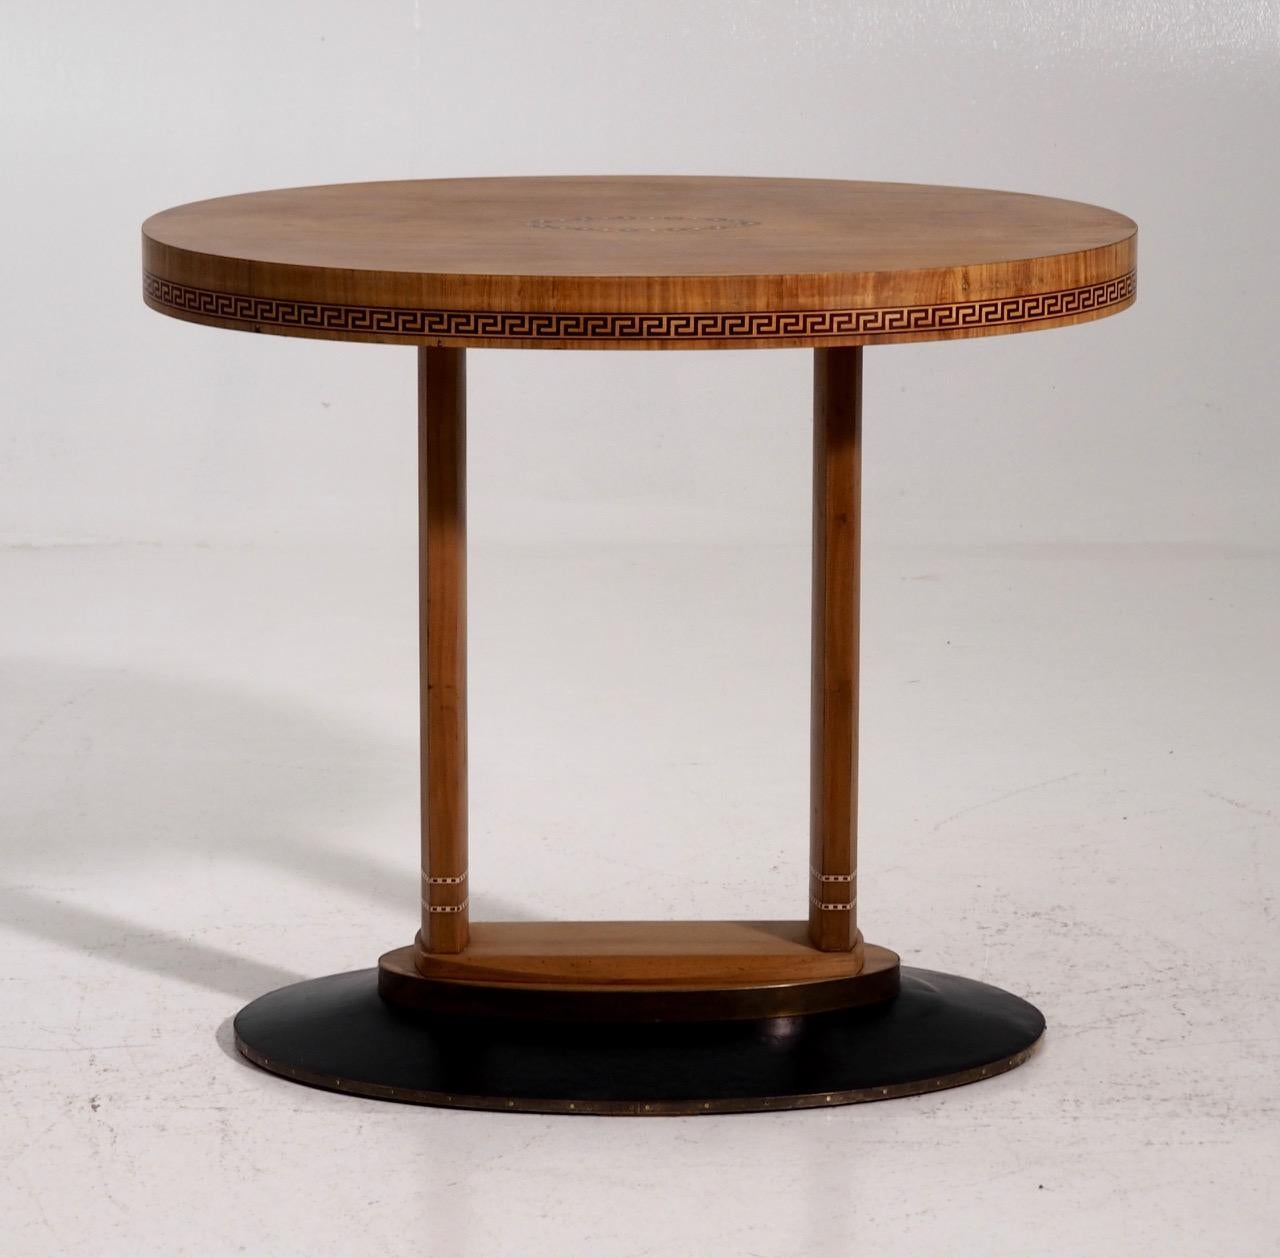 A very rare freestanding Art Nouveau oval table, with two pillars made in cherrywood. Inlaid with mother of pearl and with various fruitwood. Probably by one of the famous Austrian architects, circa 1905.